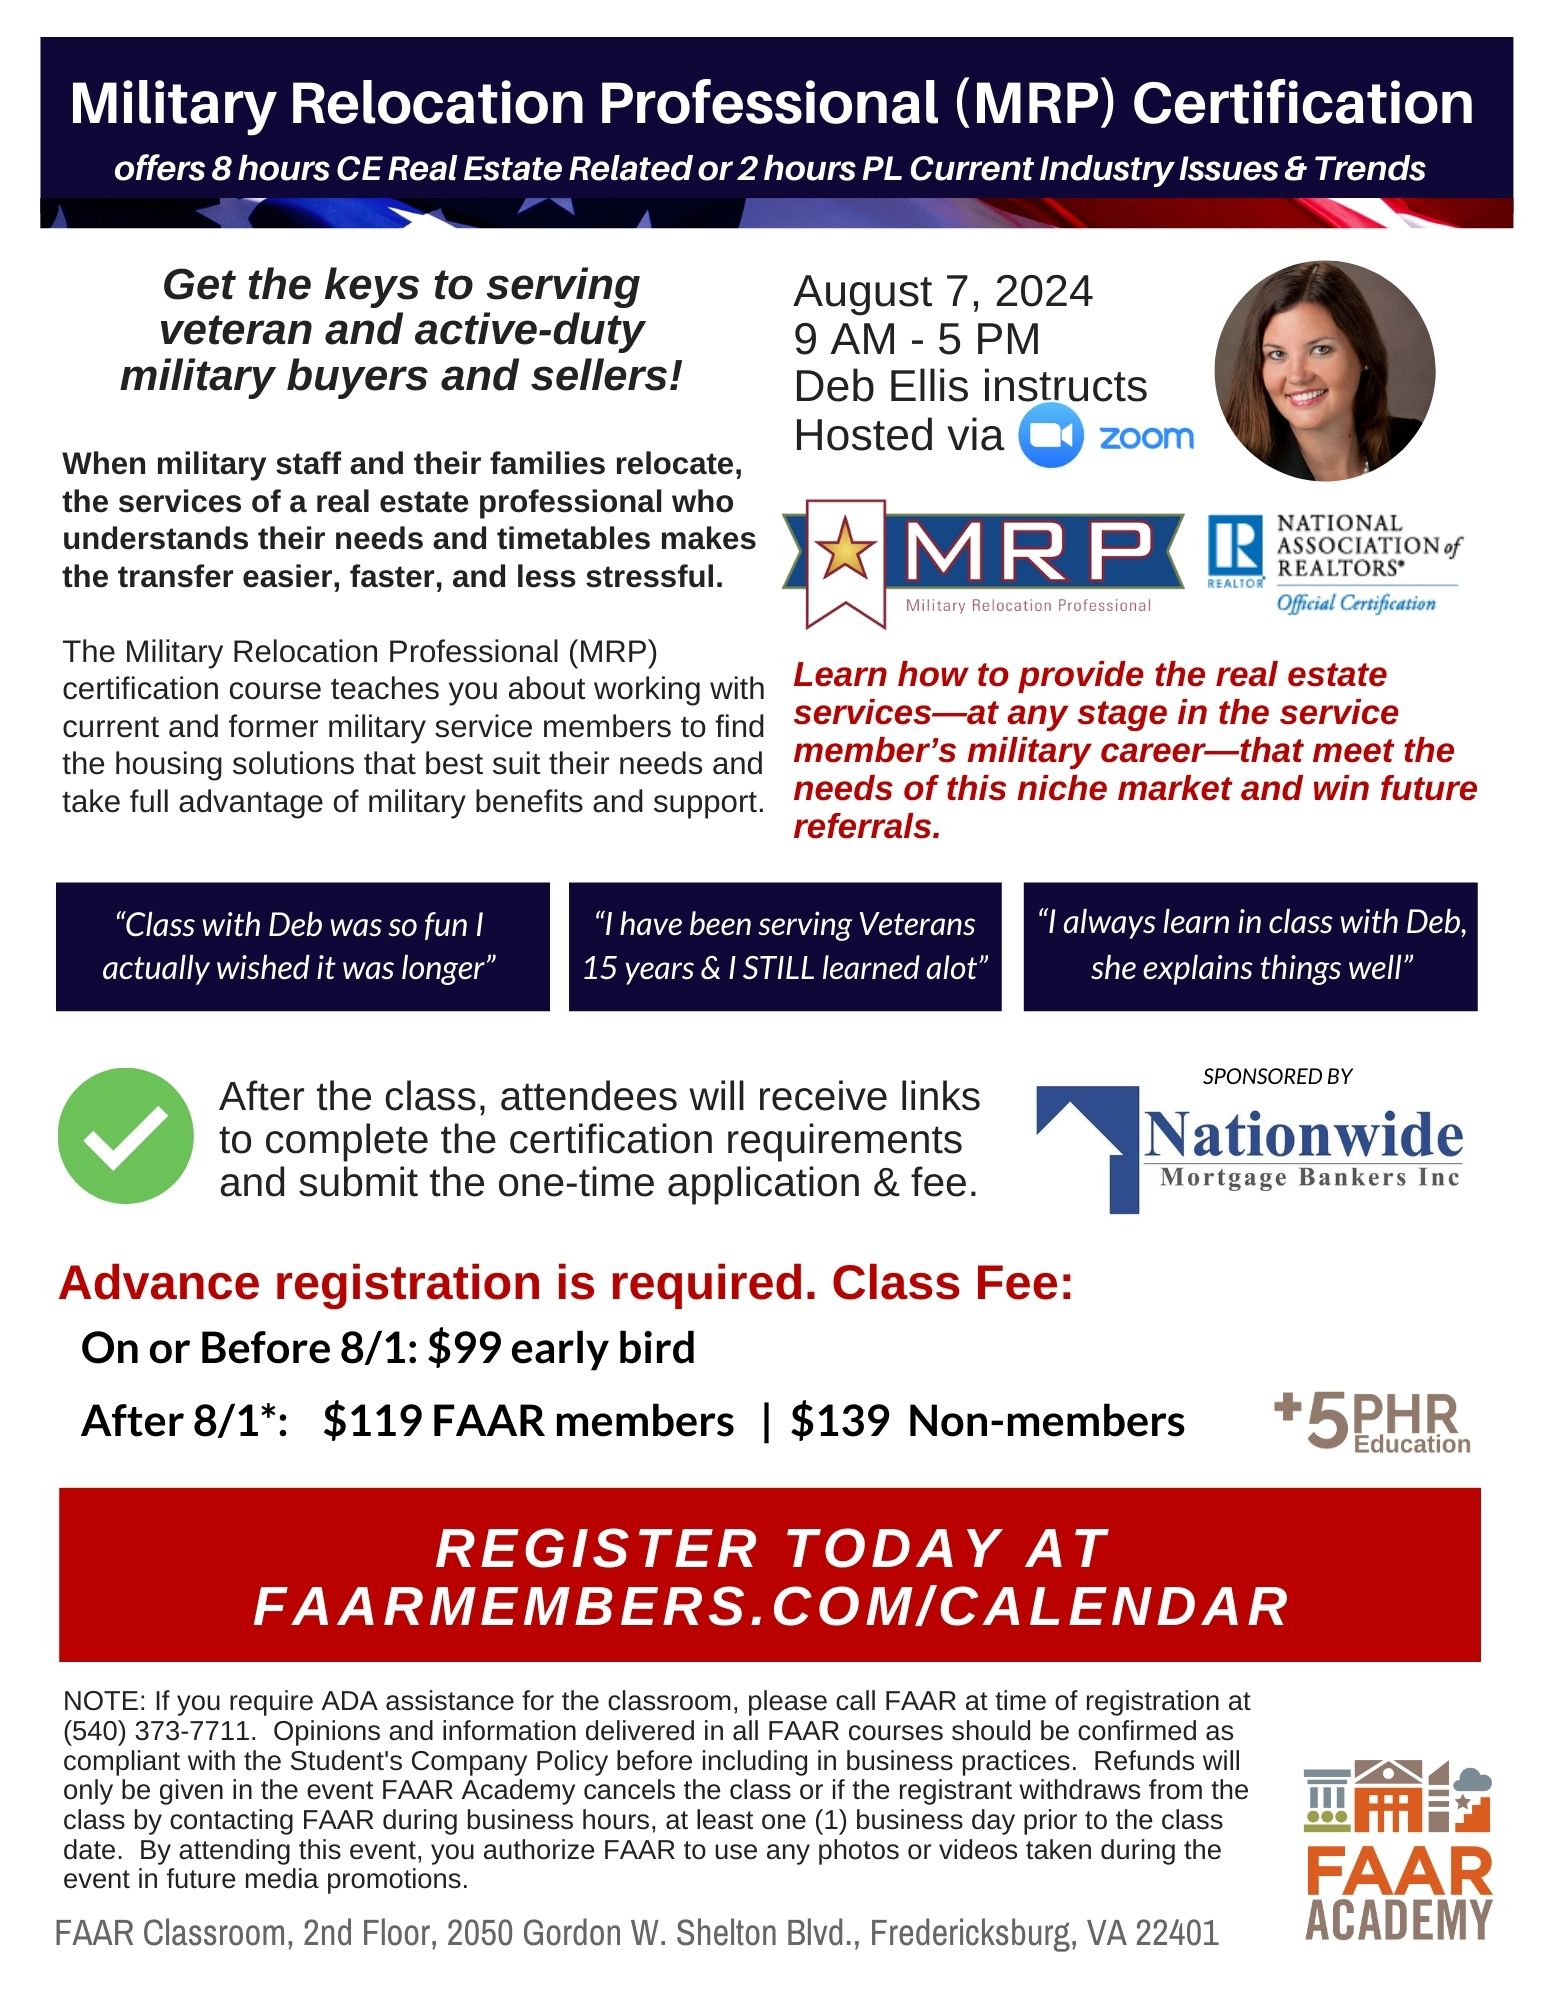 Flyer for August 7, 2024 Military Relocation Professional Certification Class hosted on zoom. Call 540-373-7711 for details.